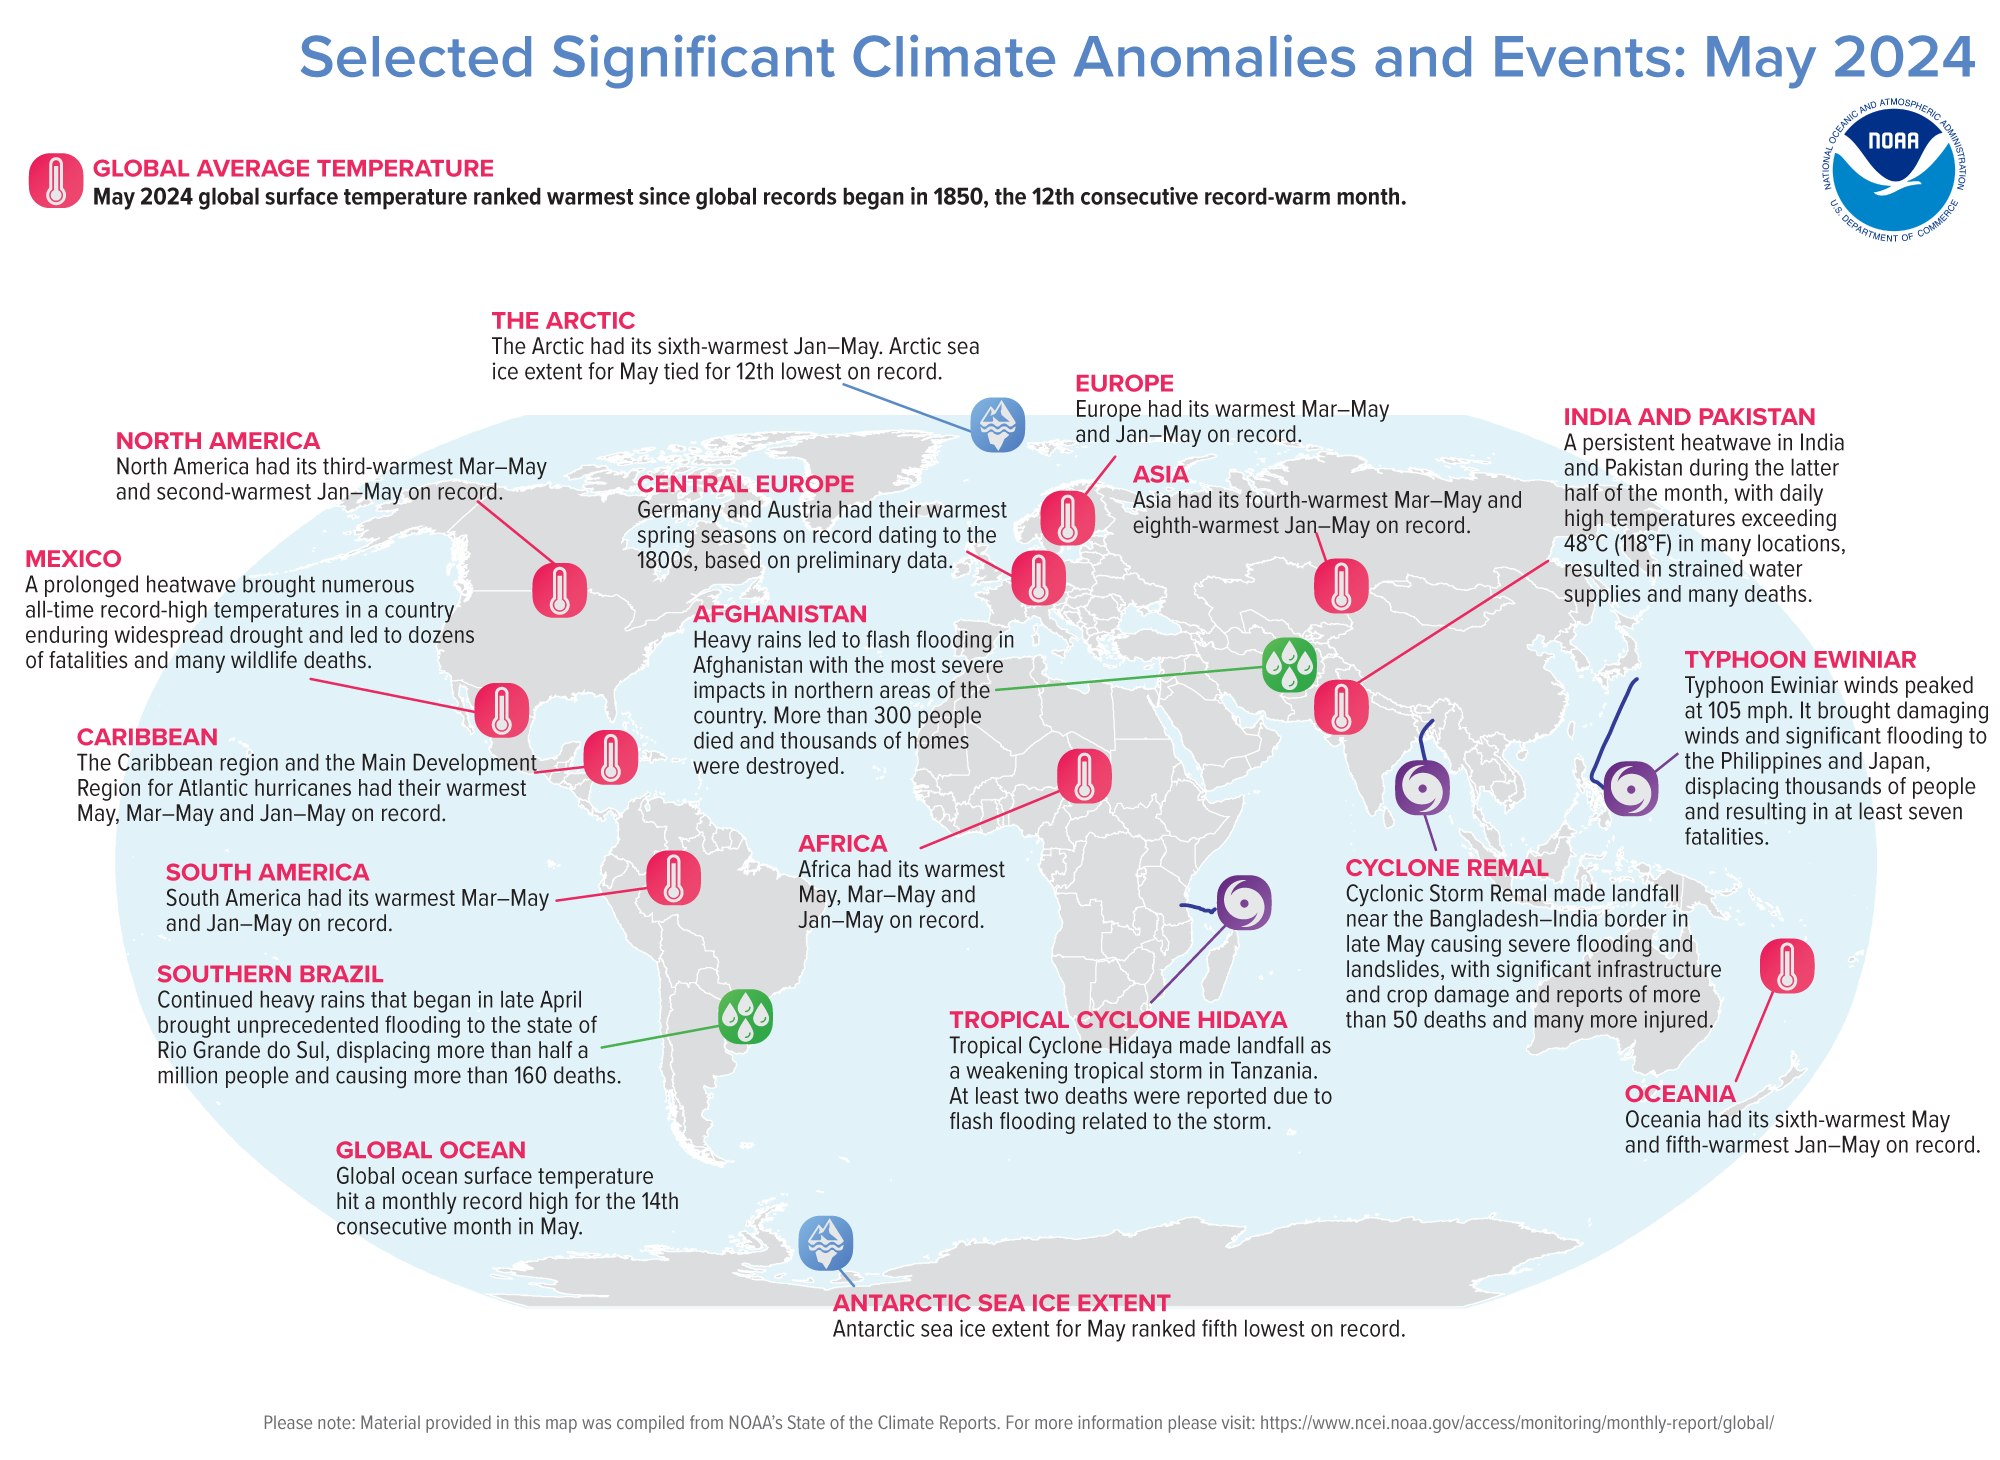 Map of the globe depicting Selected Significant Climate Anomalies and Events for May 2024.